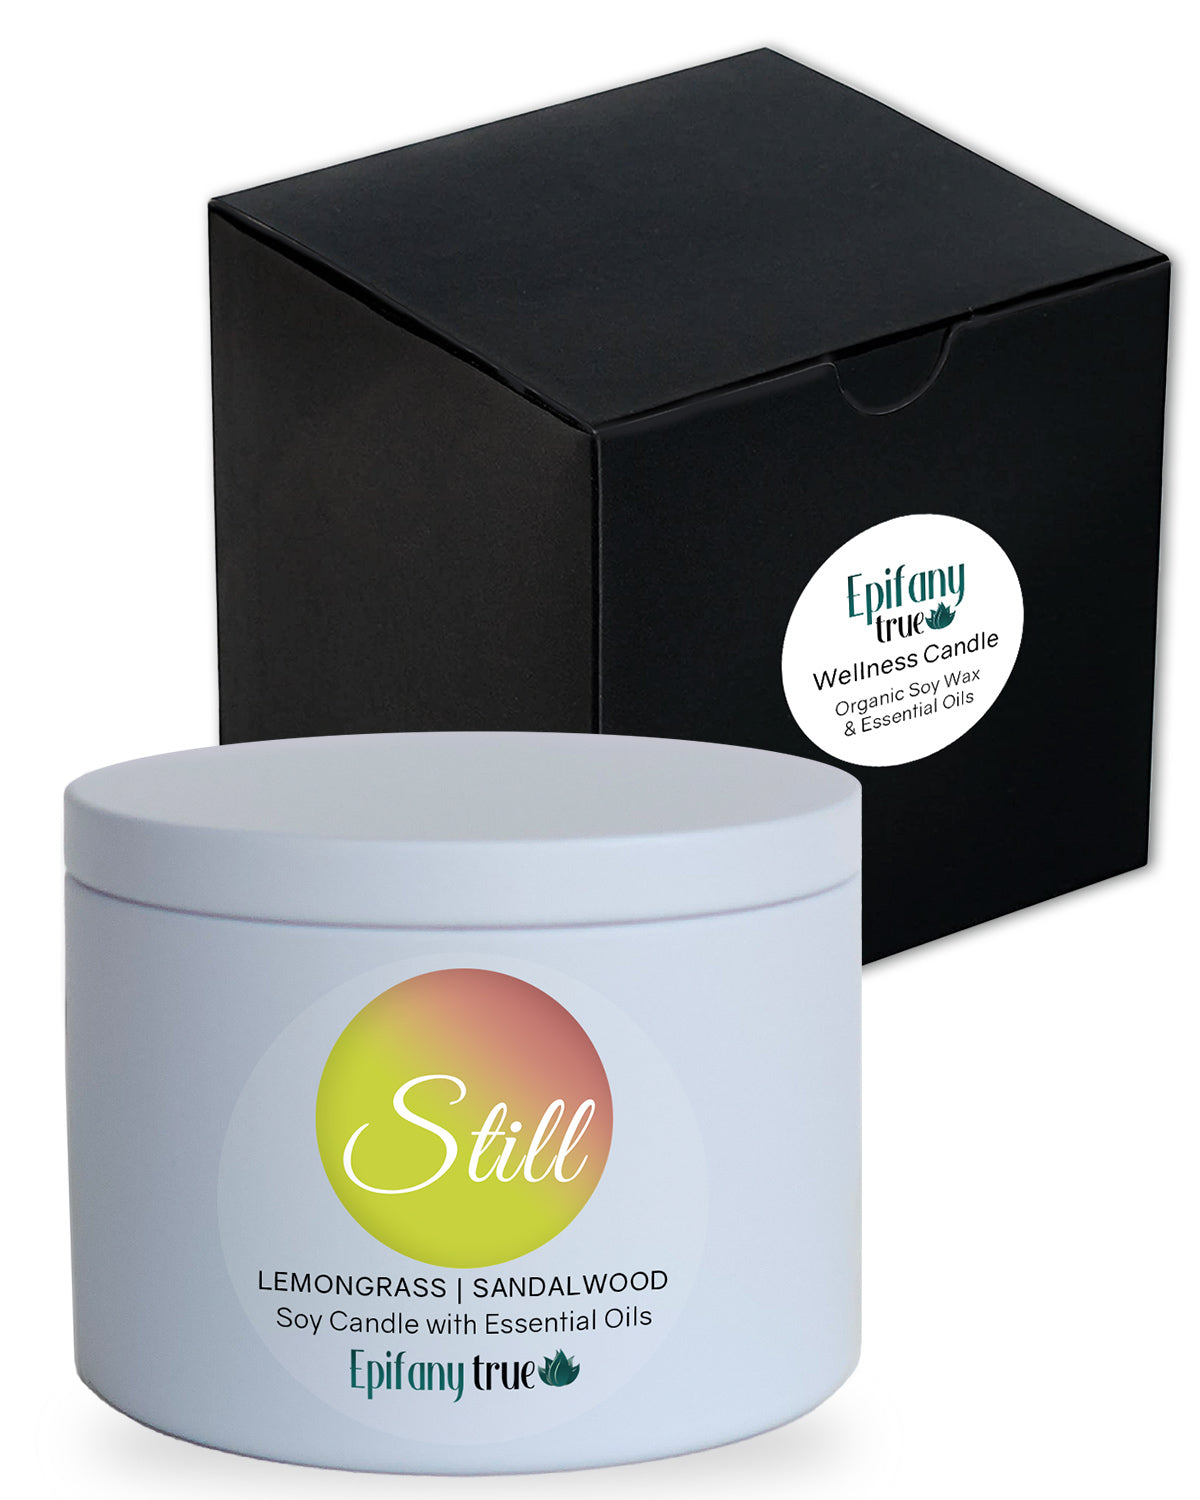 STILL Lemongrass & Sandalwood Wellness Candle with Organic Soy Wax and Essential Oils 8oz